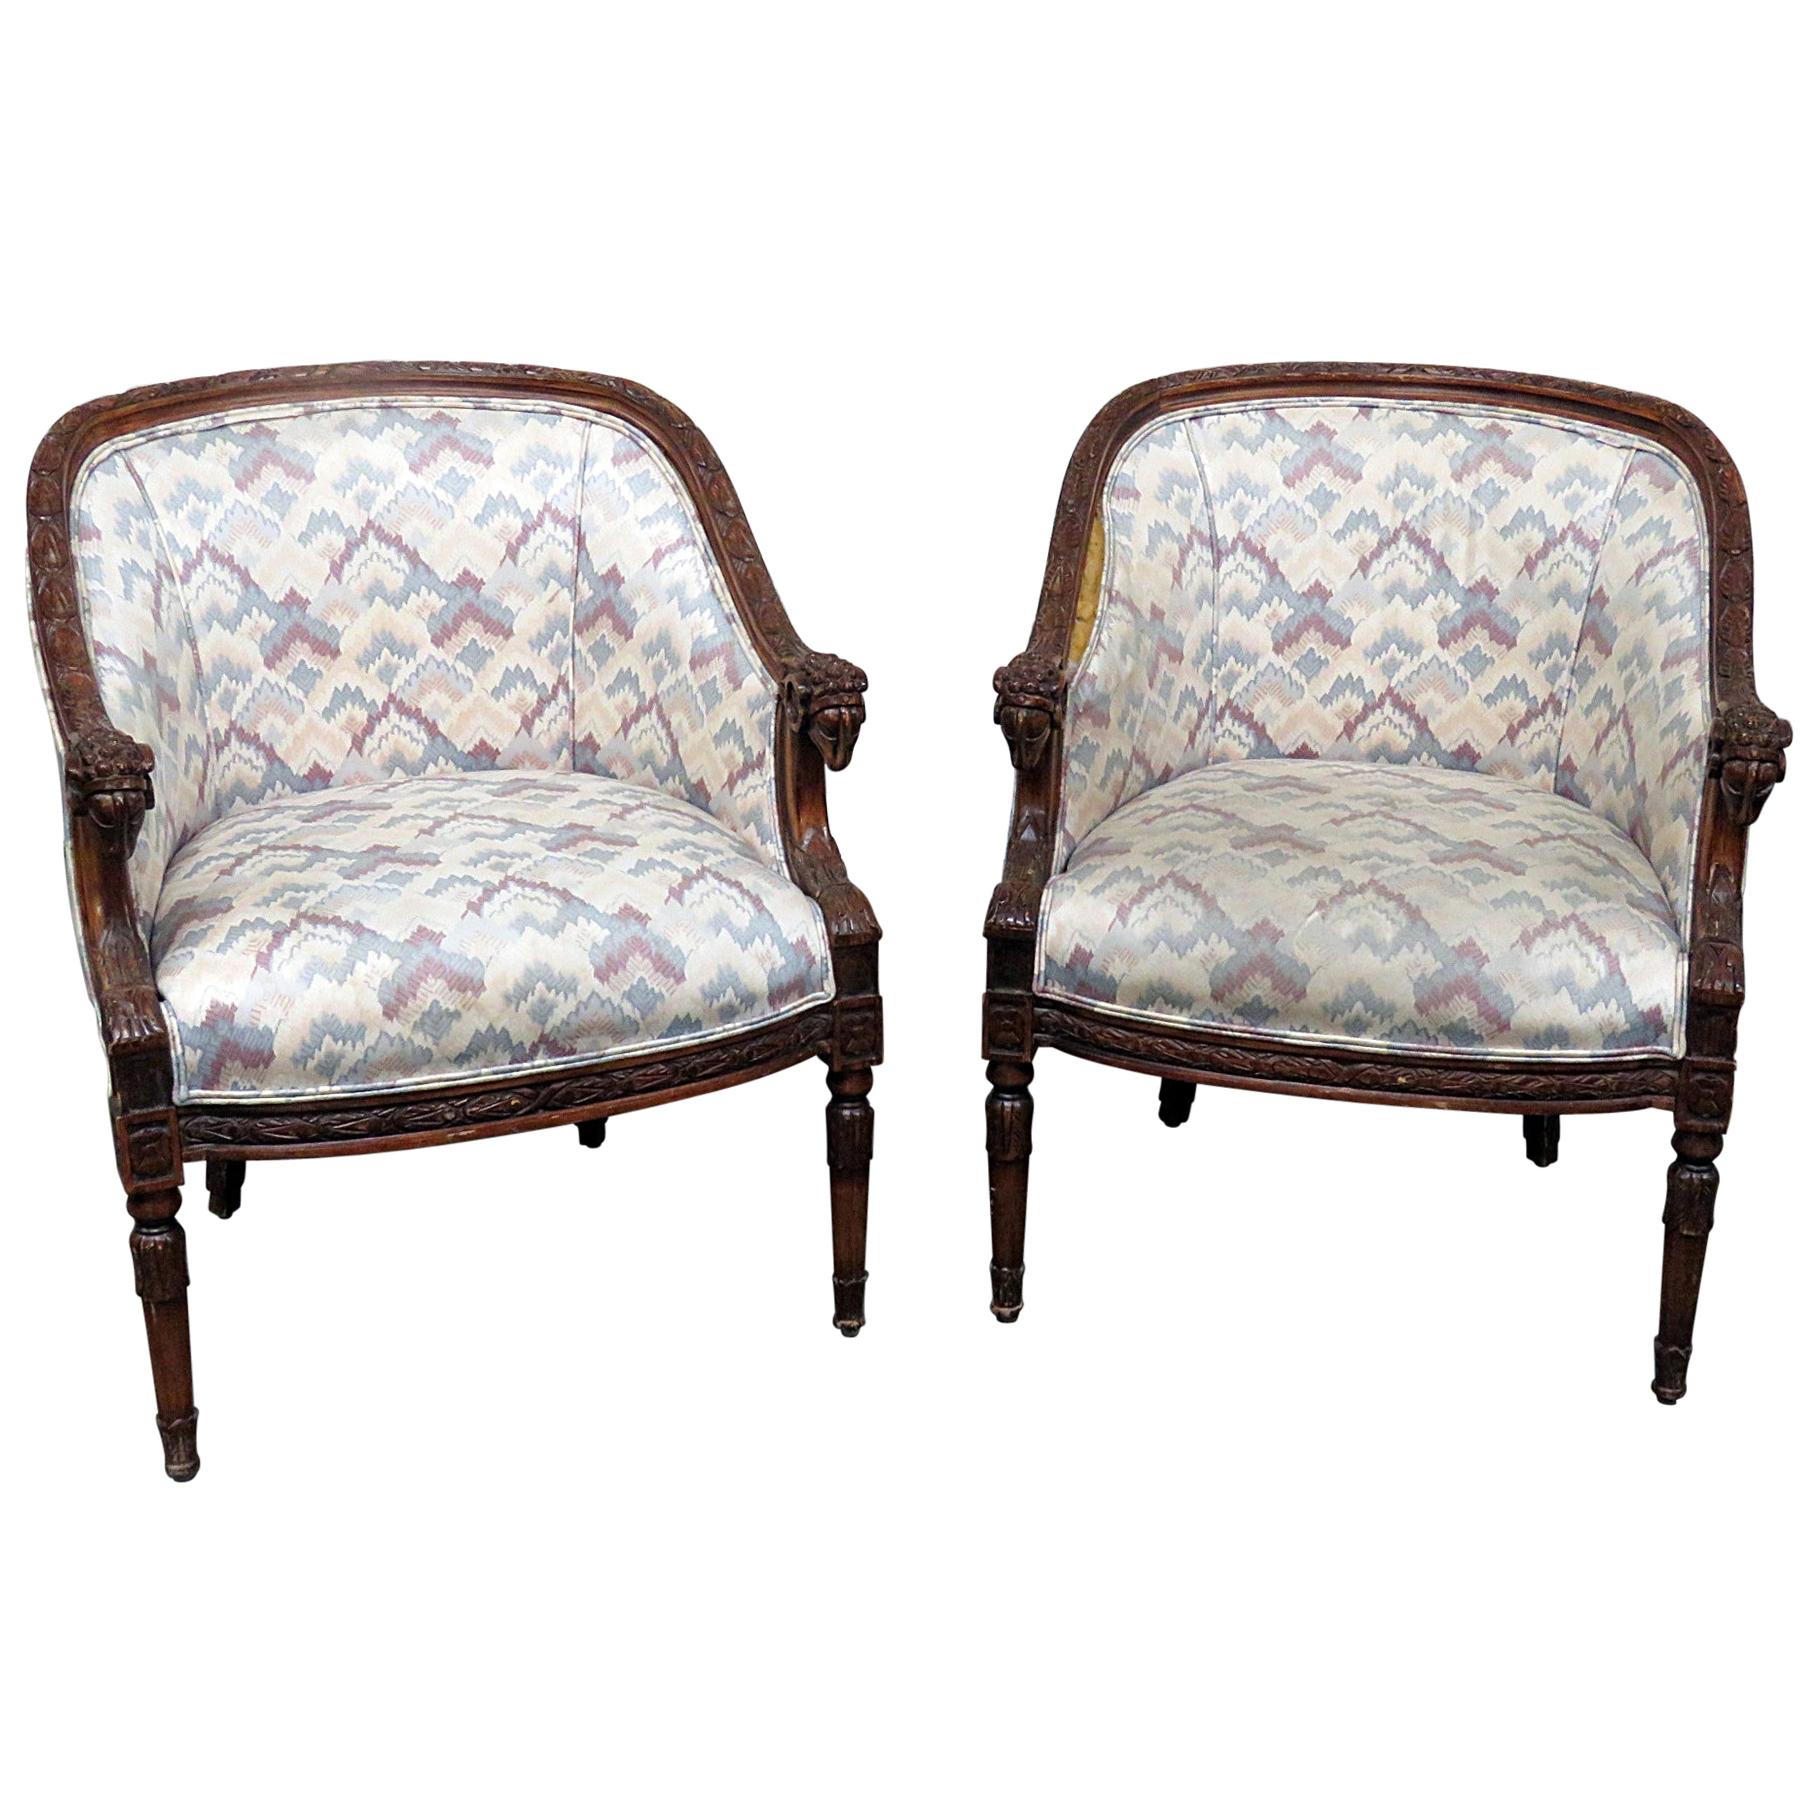 Pair of Carved Walnut French Regency Style Rams Head Club Parlor Chairs